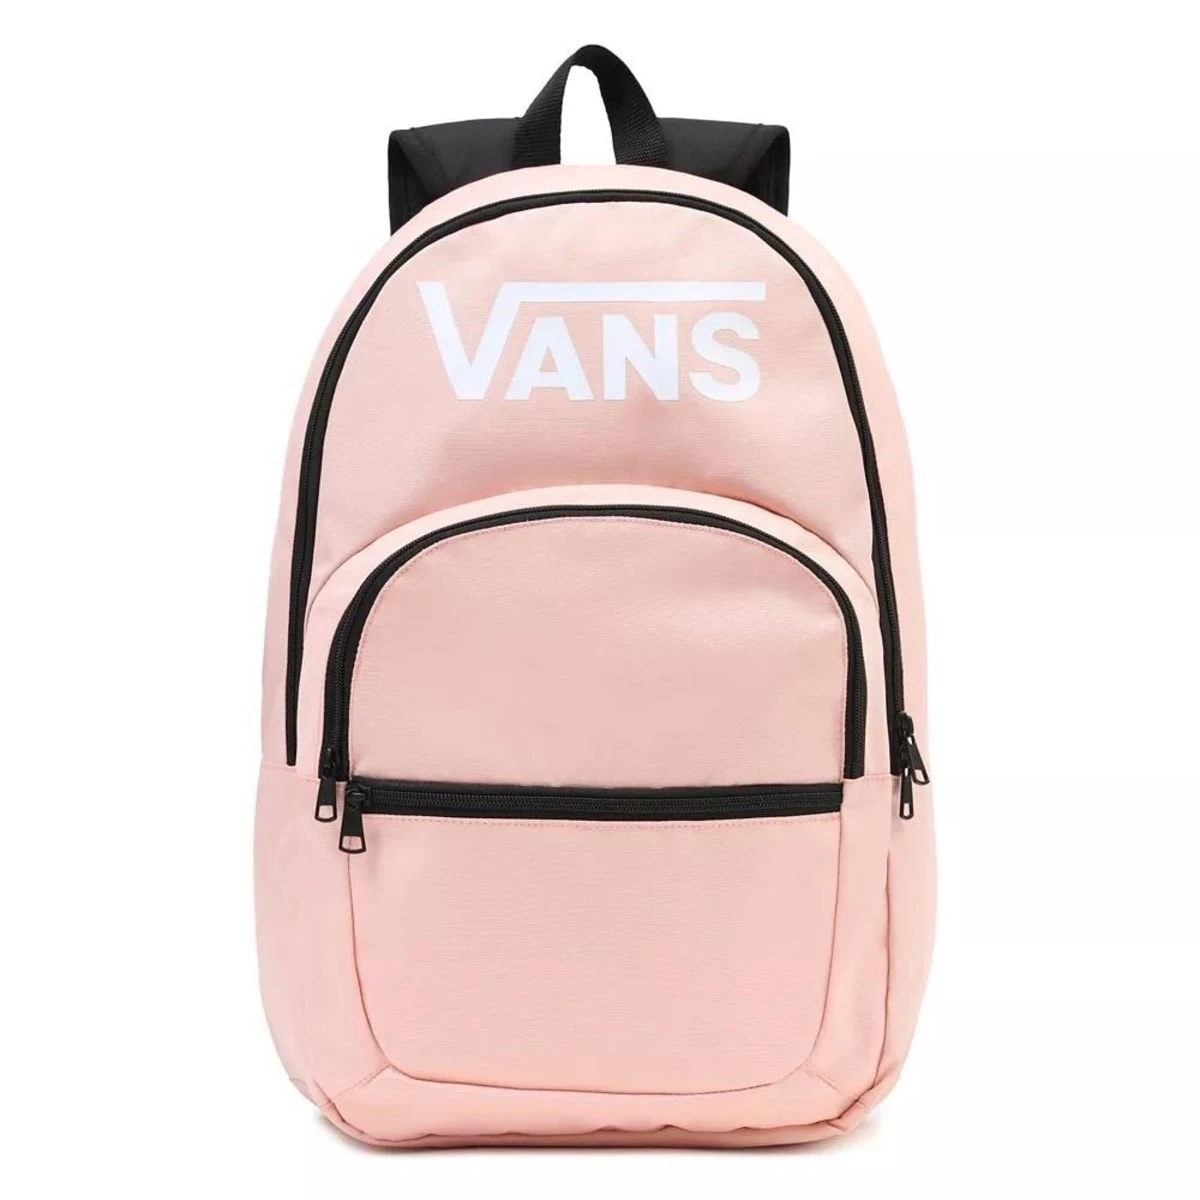 Vans Sports Backpacks, Ranged 2 Backpack-b, Vn0a7ufny6t1, Back To School,  Collegial, Unisex, Coral Color With Blank Brand Logo, Reinforced Handles  And Backing, Front Pocket, Large Compartment - Backpacks - AliExpress